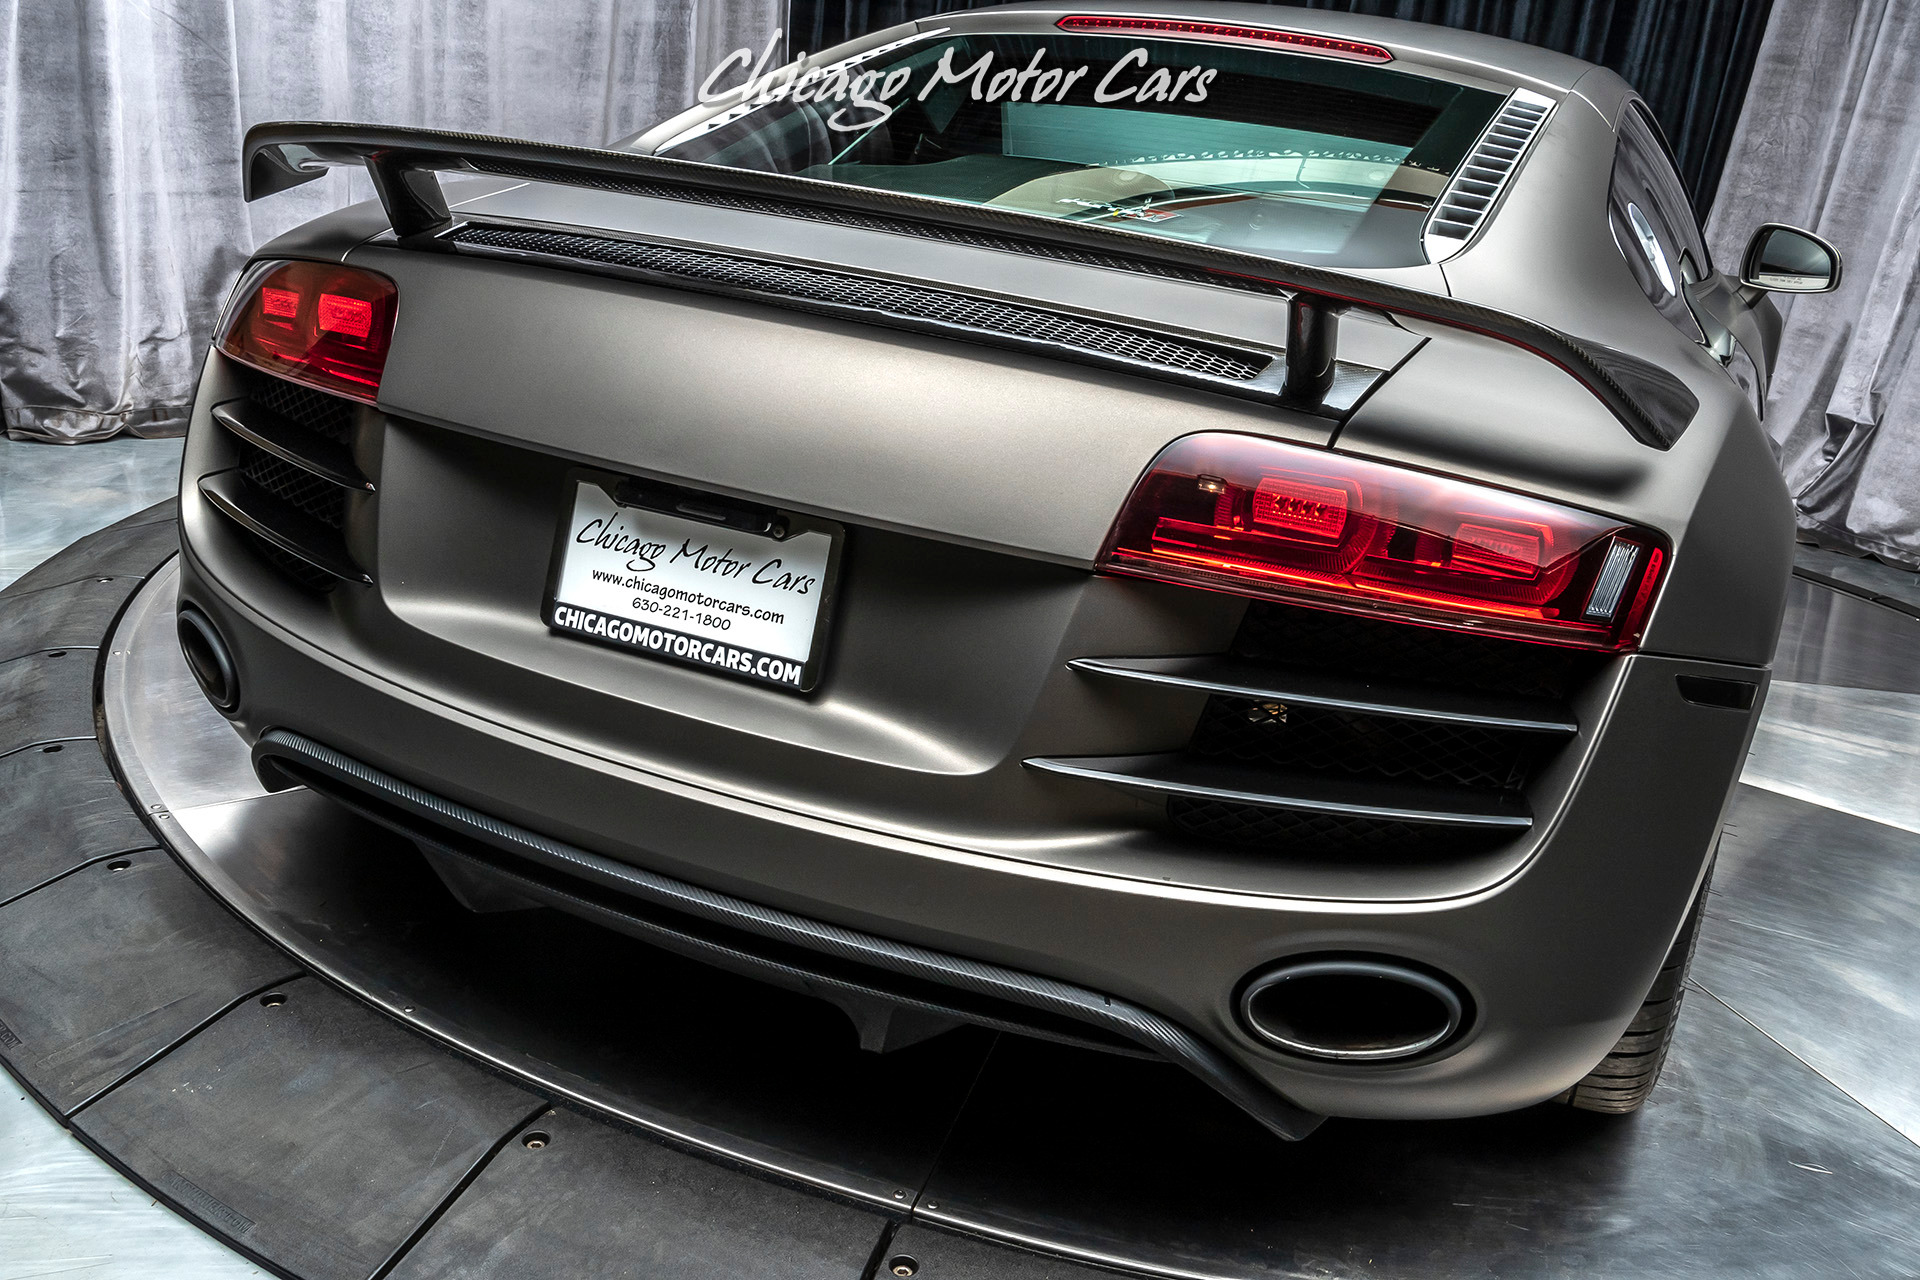 Used-2011-Audi-R8-52-quattro-V10-6-Speed-Manual-AMS-Twin-Turbo-Alpha-Package